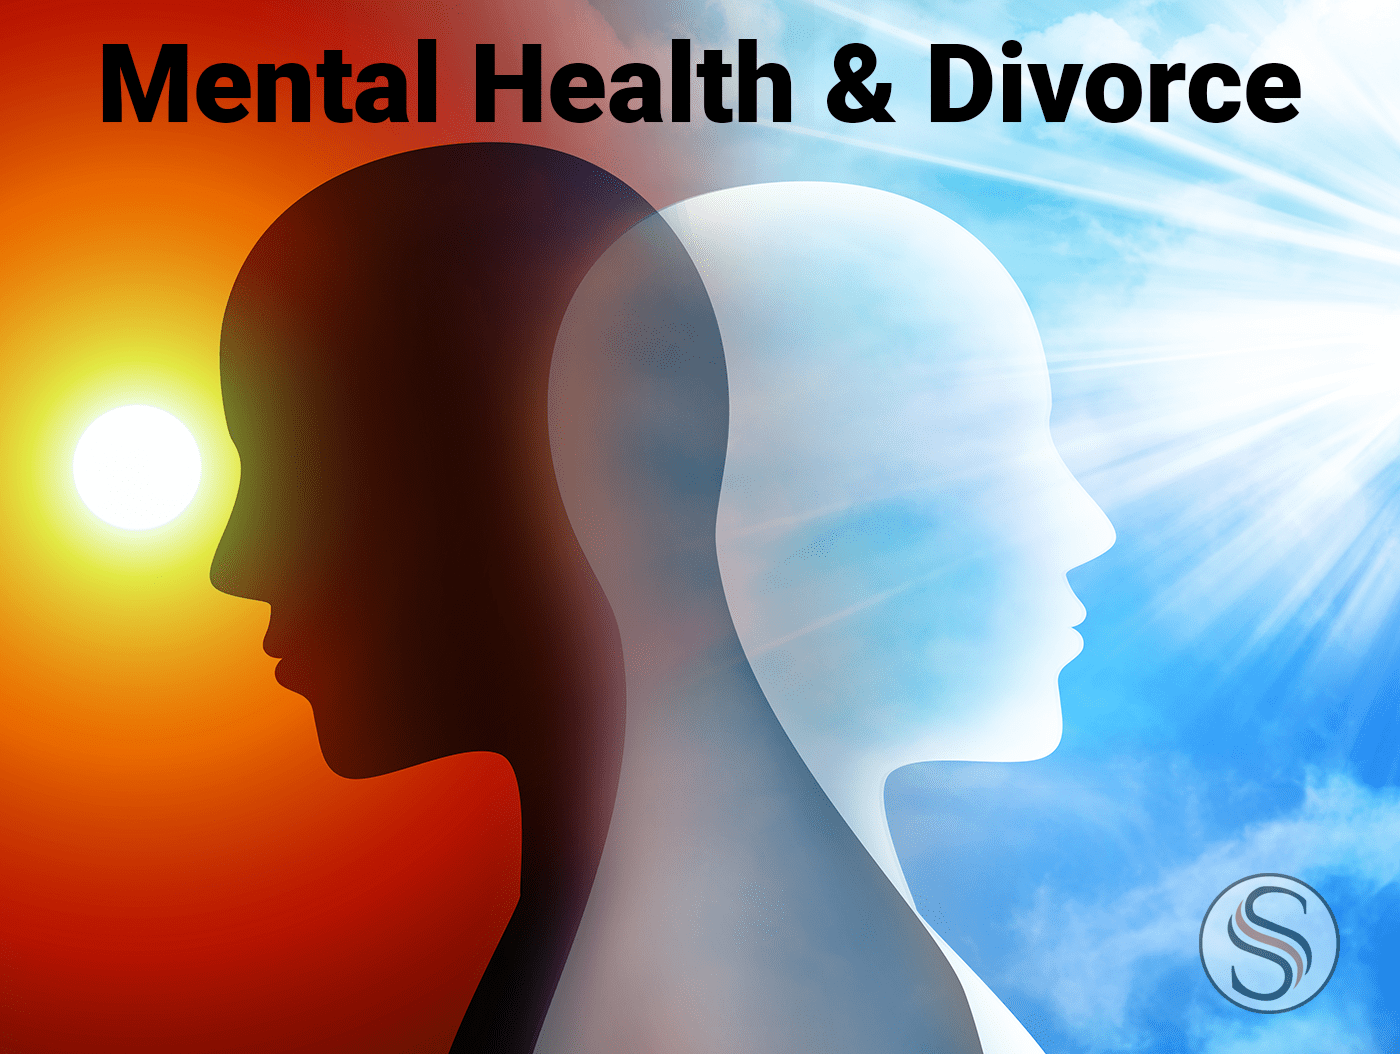 Mental Health and Divorce text over graphic of sad and happy silhouettes